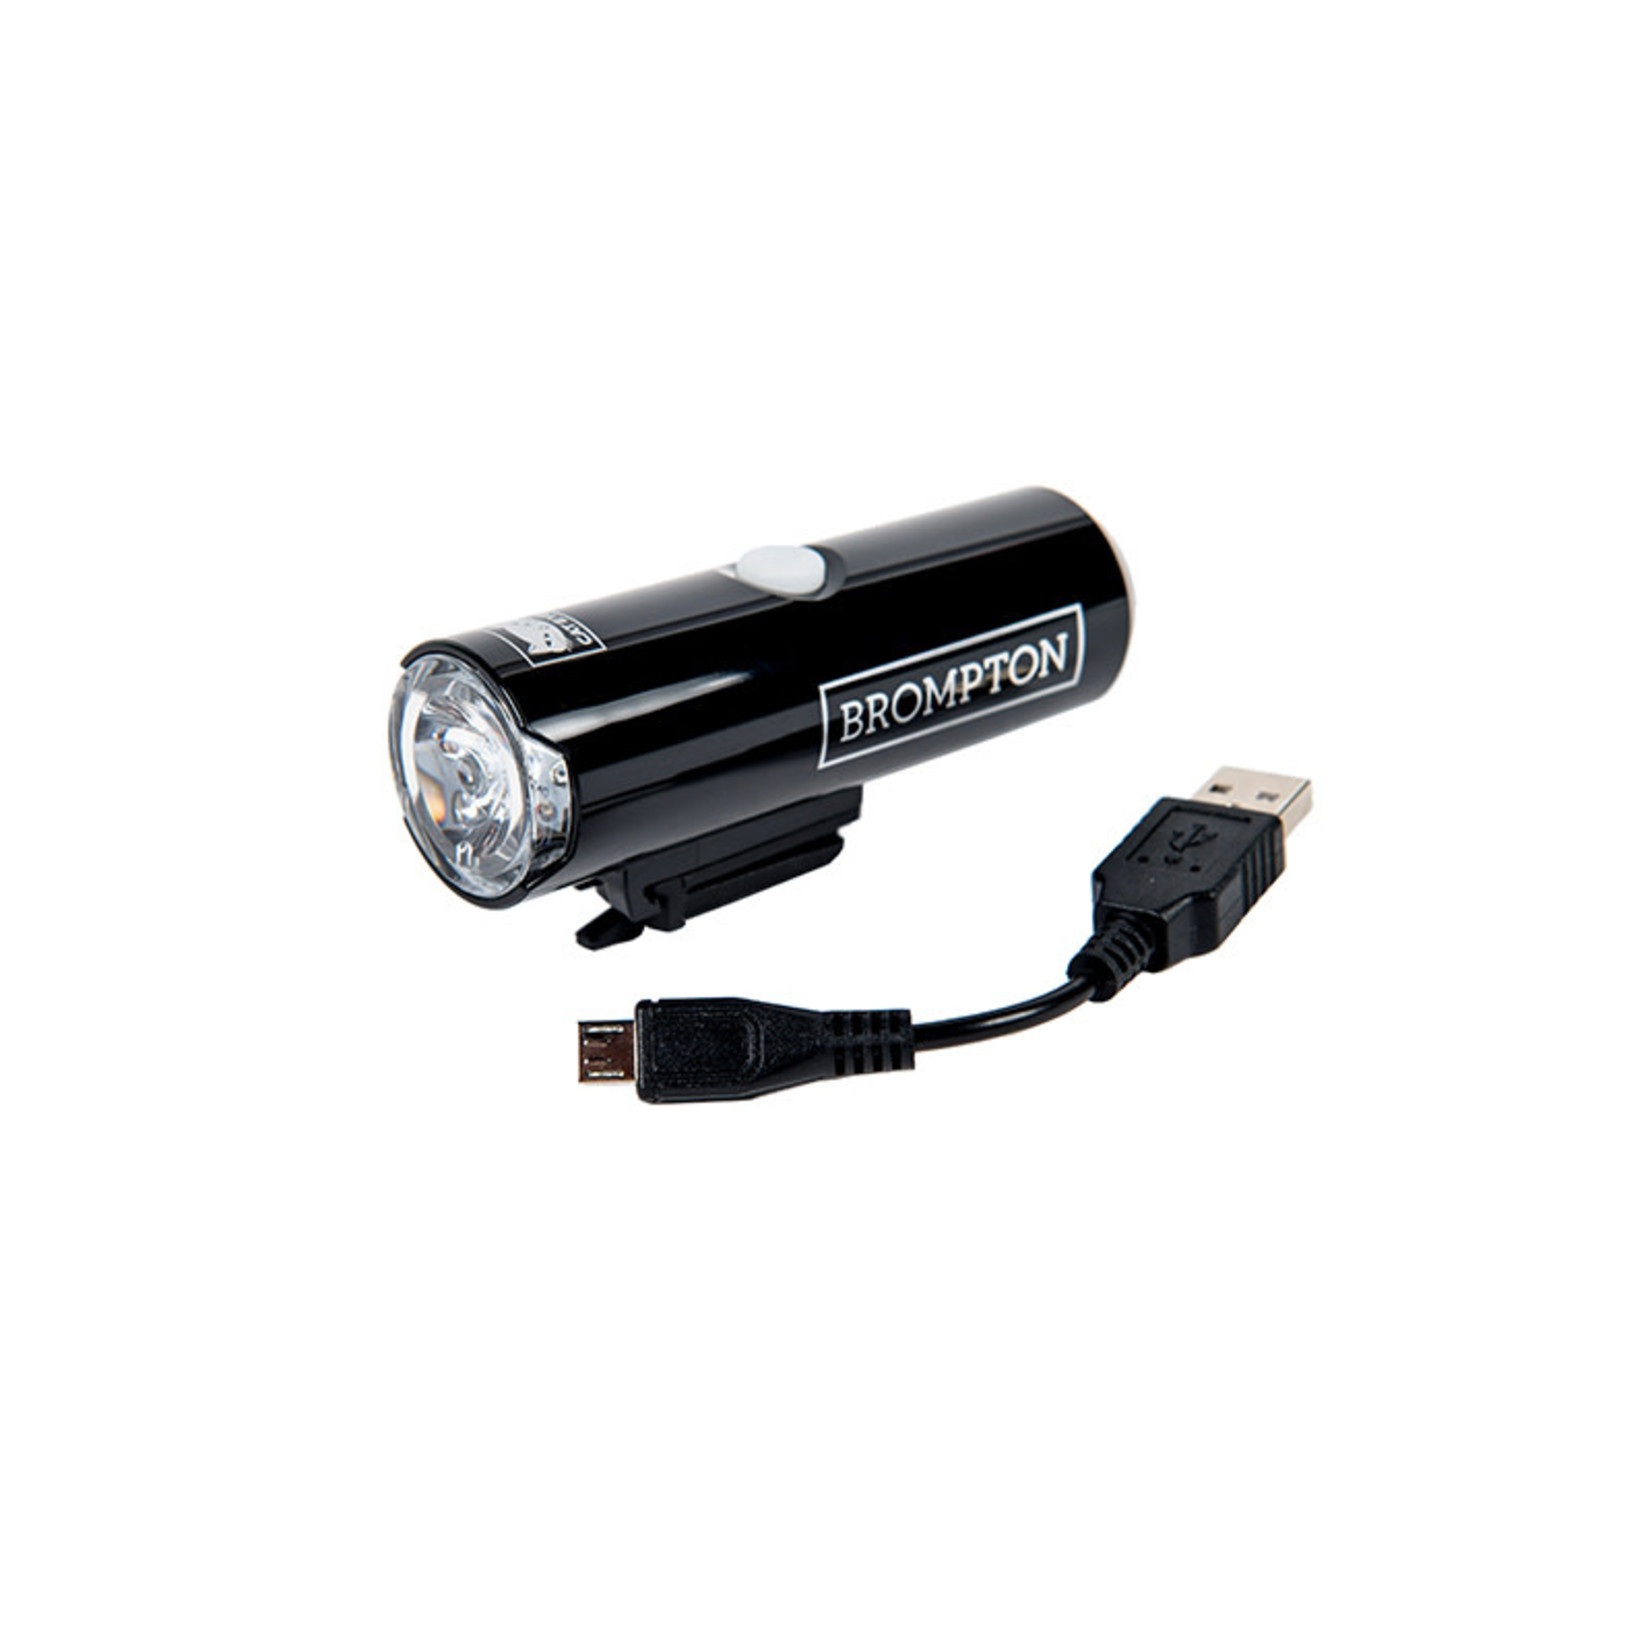 Brompton Brompton Battery Lamp - Front only - incl bracket, reflector + USB cable - (Cateye Volt400)